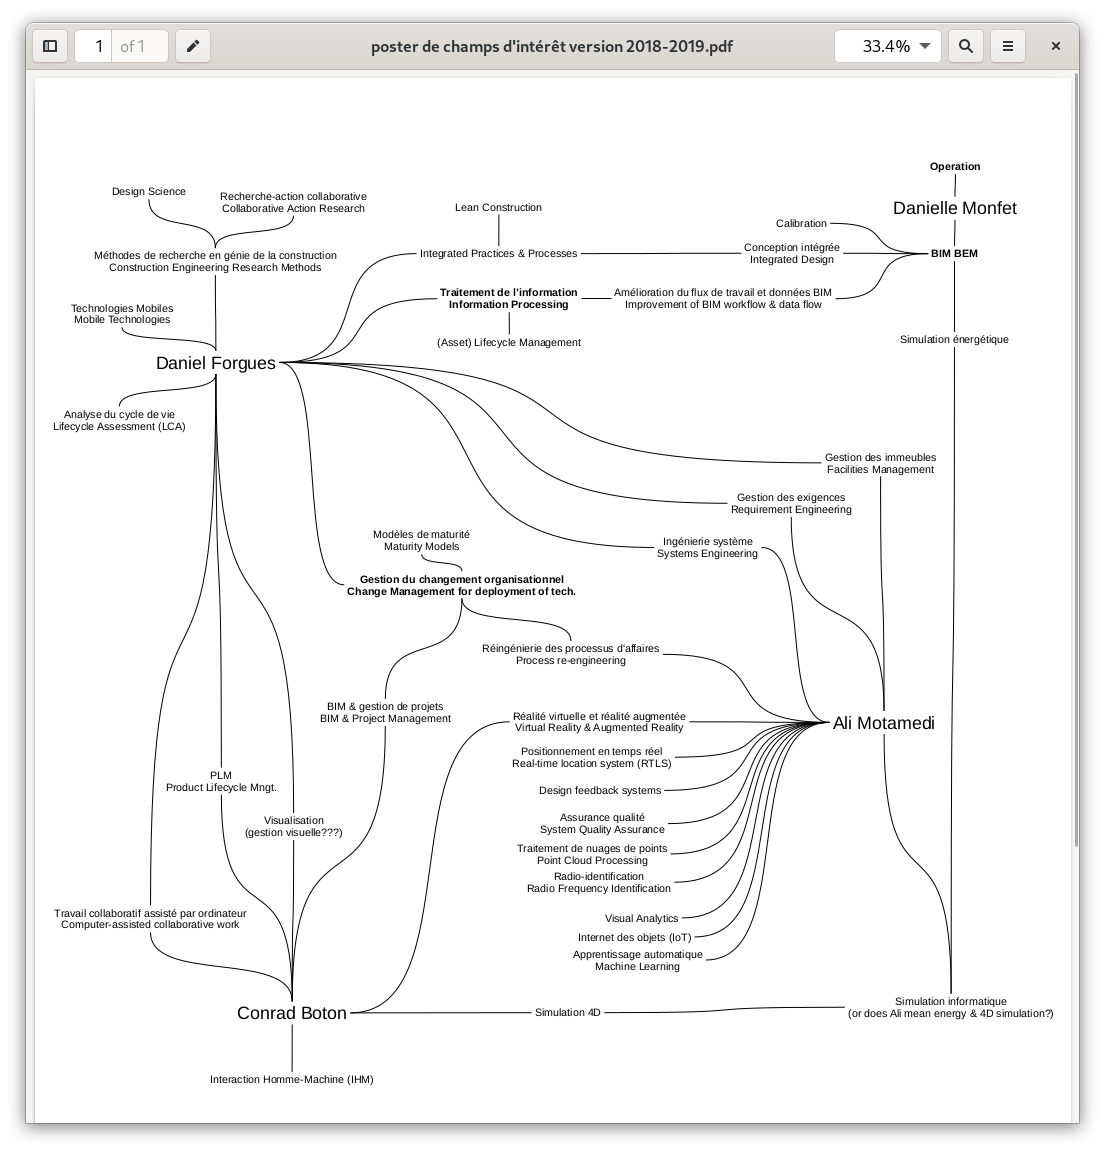 Example of a mind map where we established the links and synergies between the research subjects of different professors